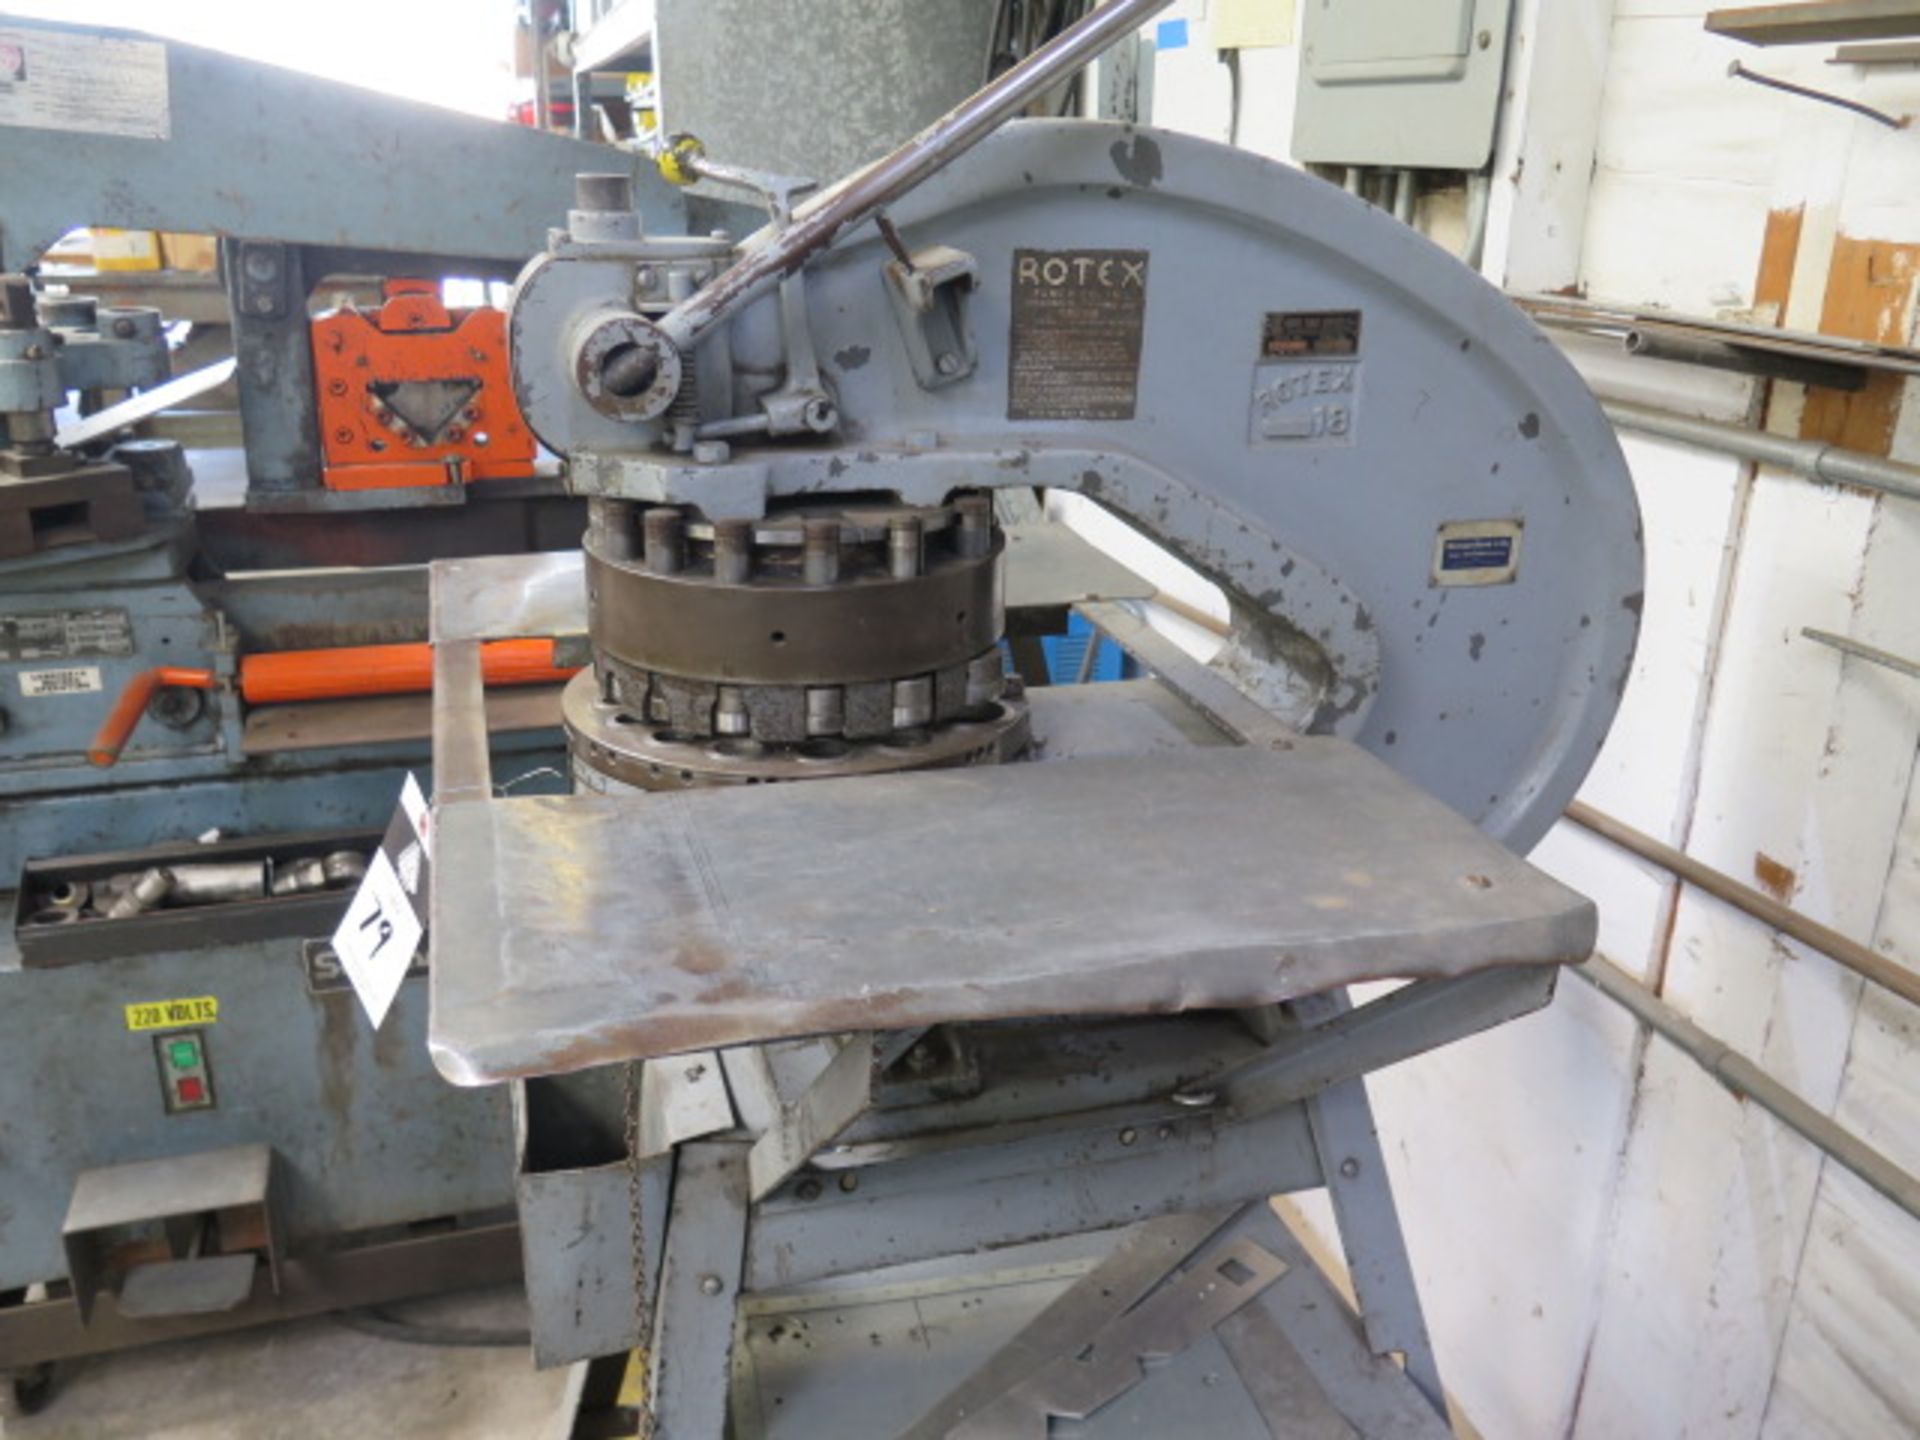 Rotex mdl 18A56 18-Station Turret Punch Press s/n 11980 w/ Rolling Stand (SOLD AS-IS - NO WARRANTY) - Image 7 of 8